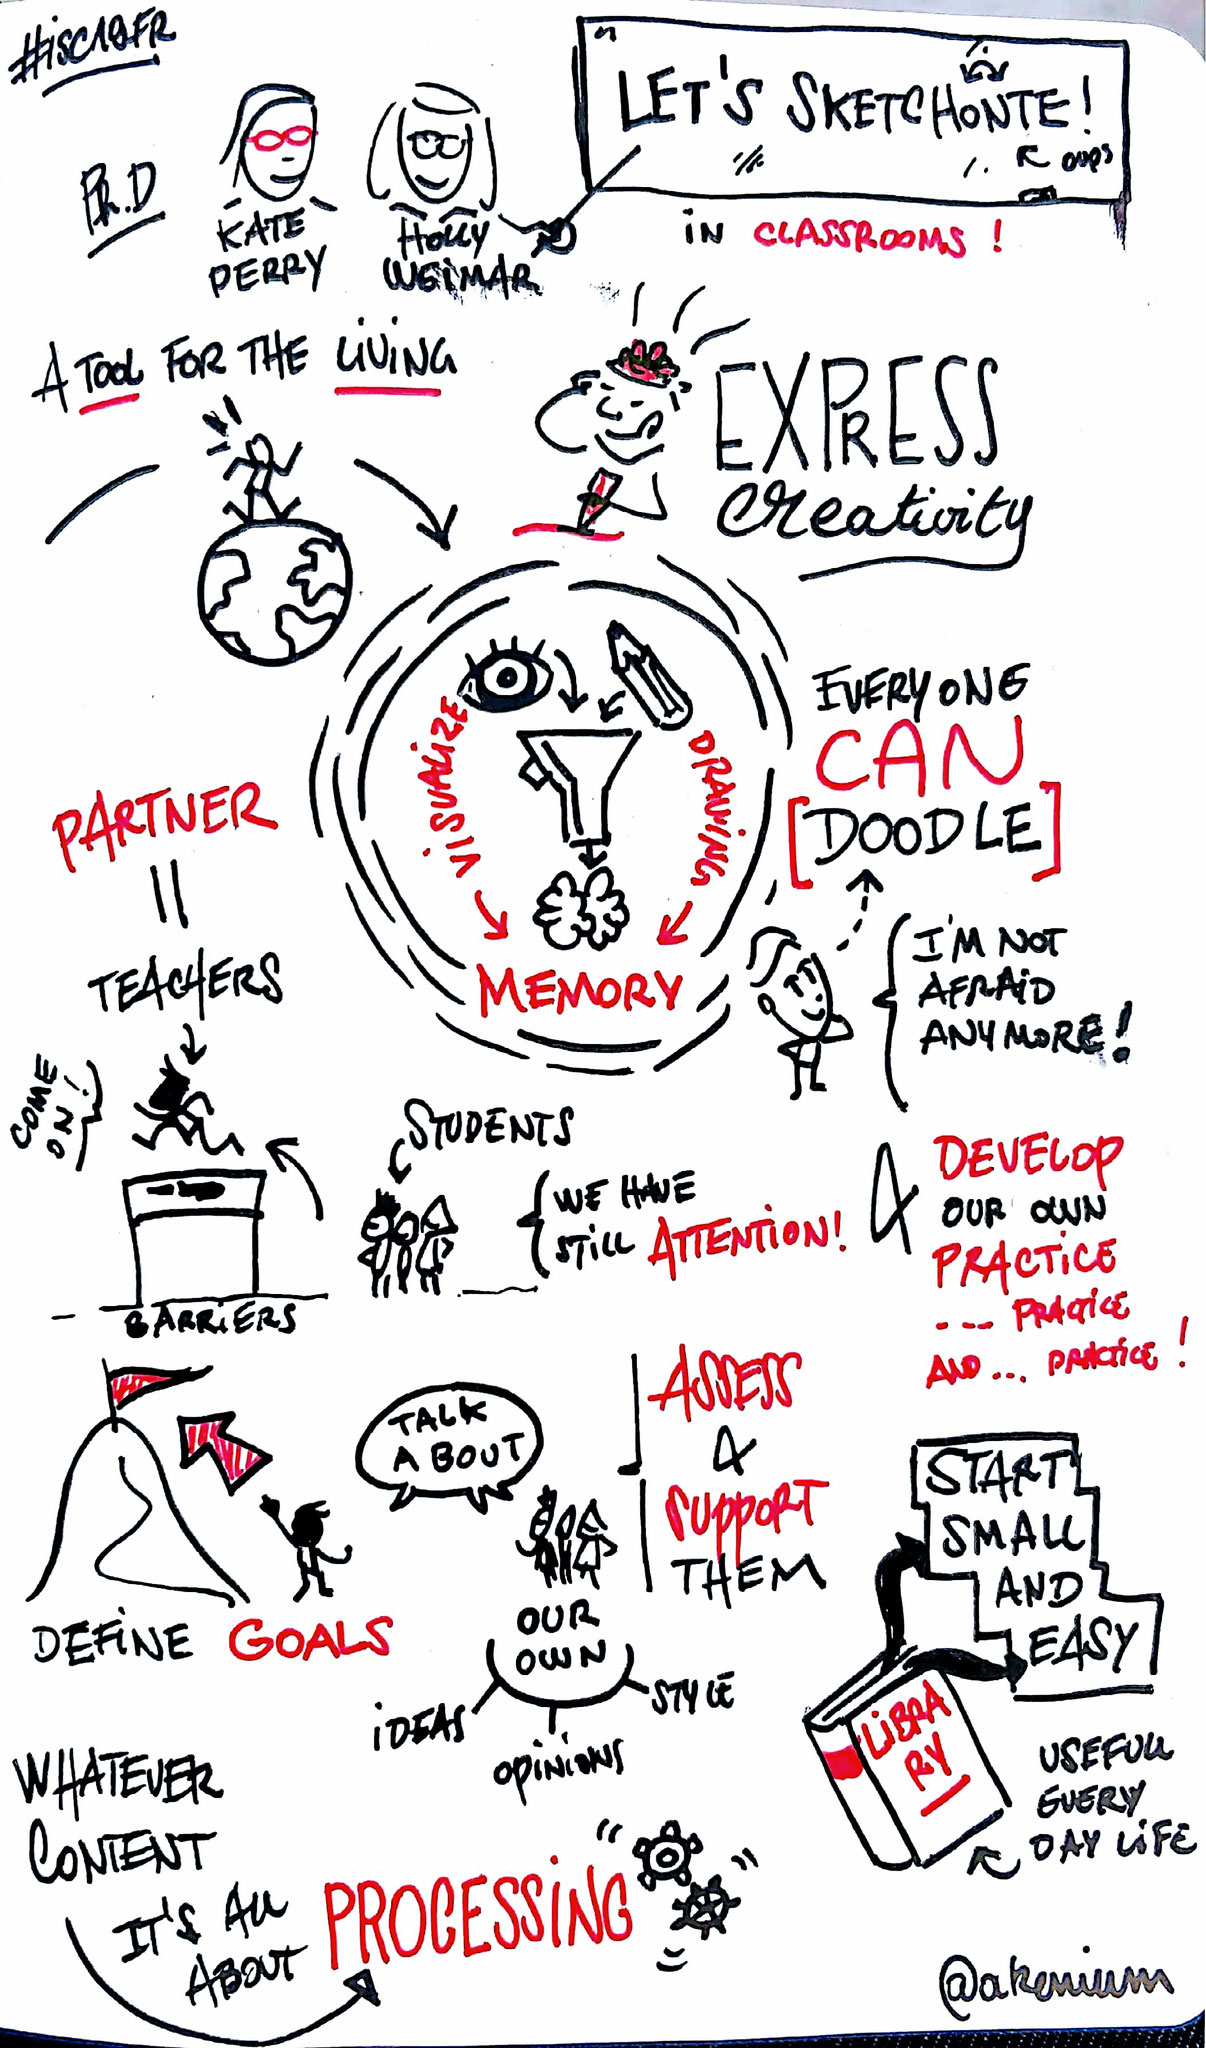 Kate Perry & Holly Weimar : Sketchnote in classrooms (1/2)